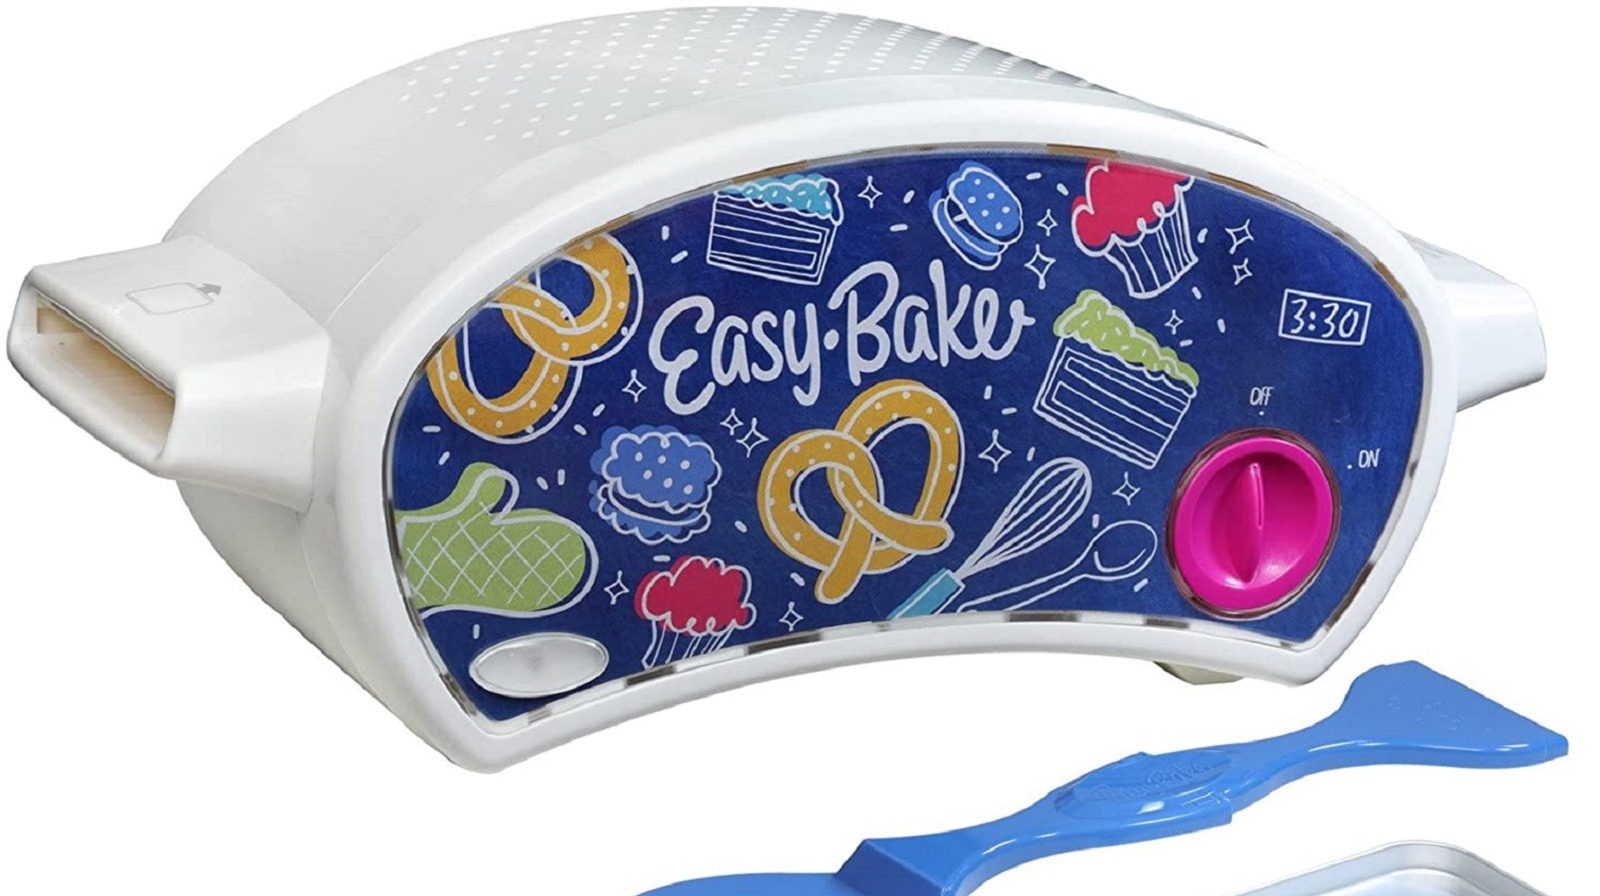 Why the Easy Bake Oven continues to fascinate us - The Globe and Mail